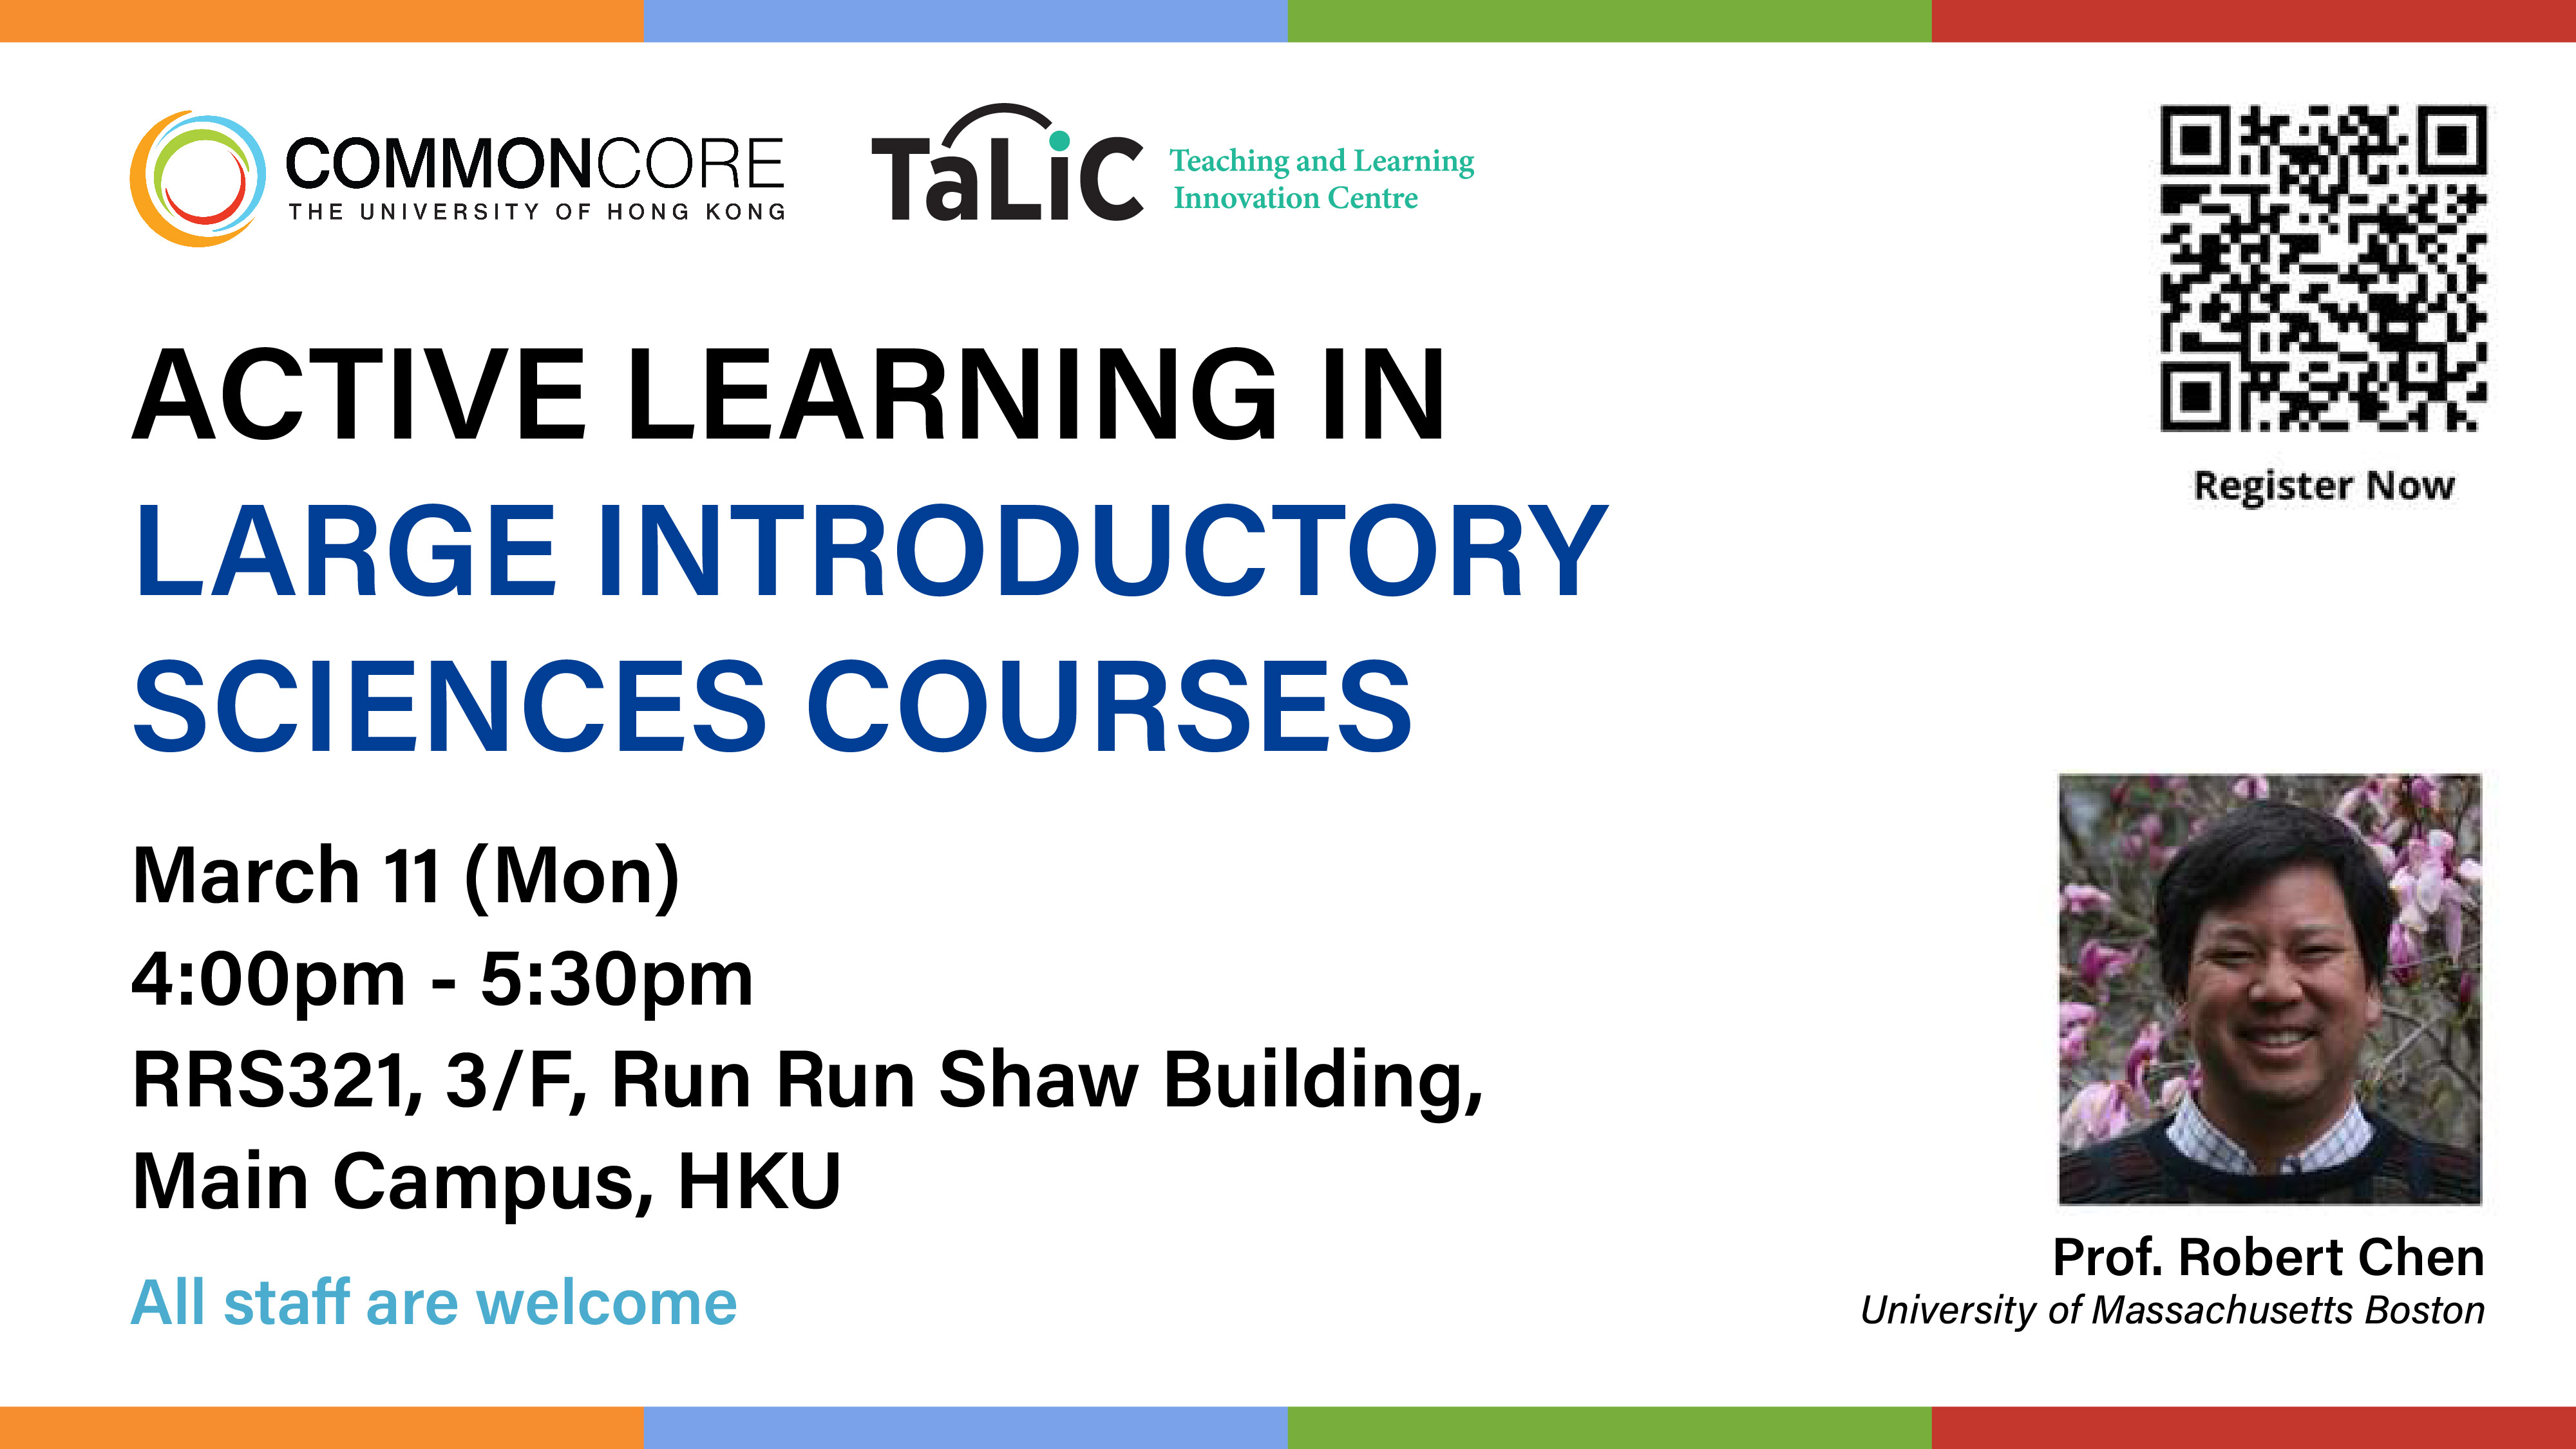 Active Learning in Large Introductory Sciences Courses